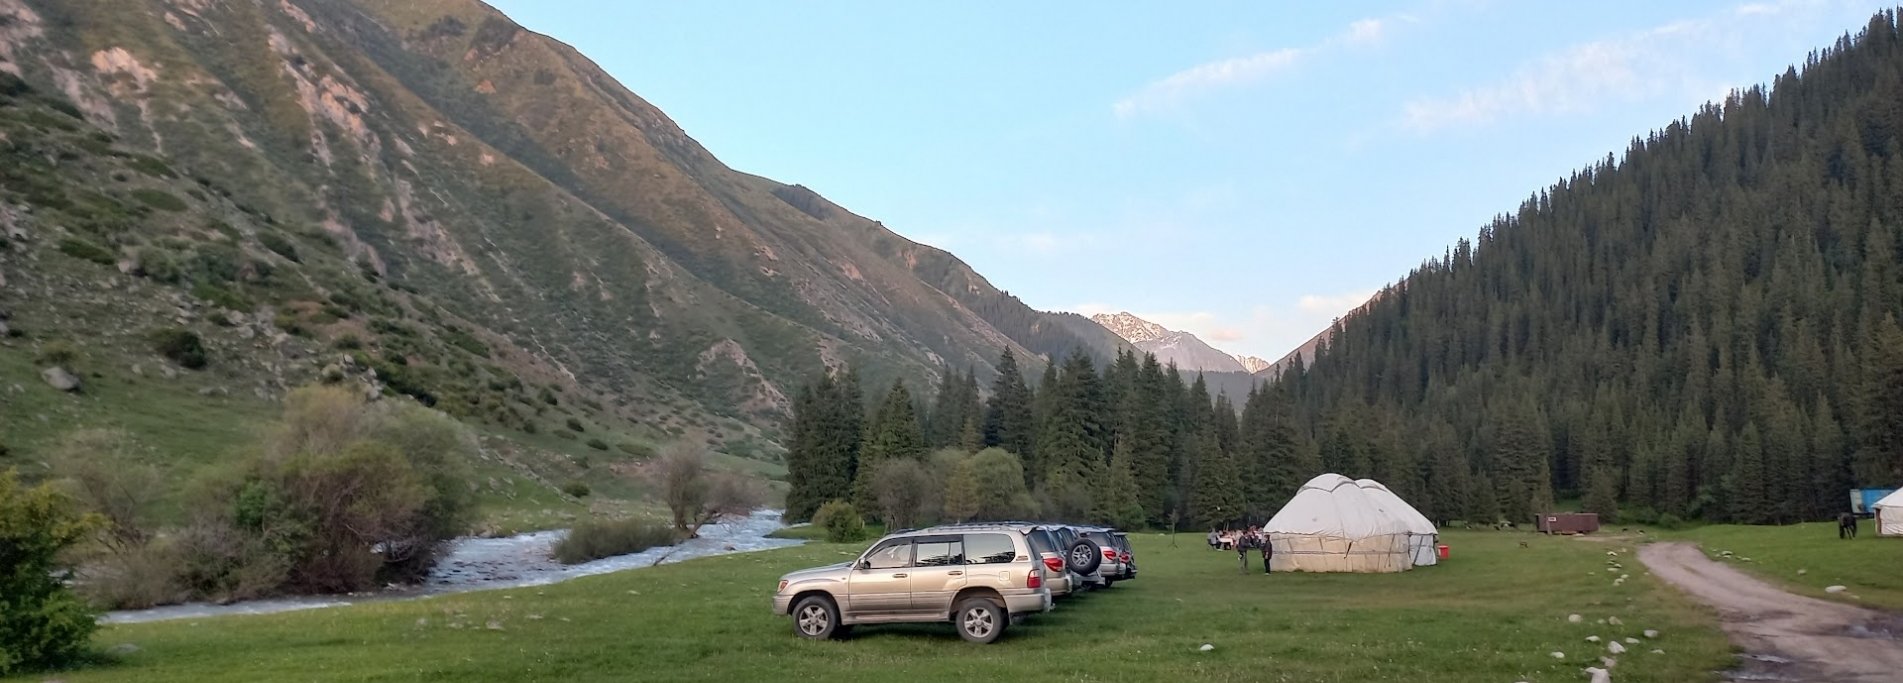 Self-drive tour in Kyrgyzstan - Drive top locations in a week